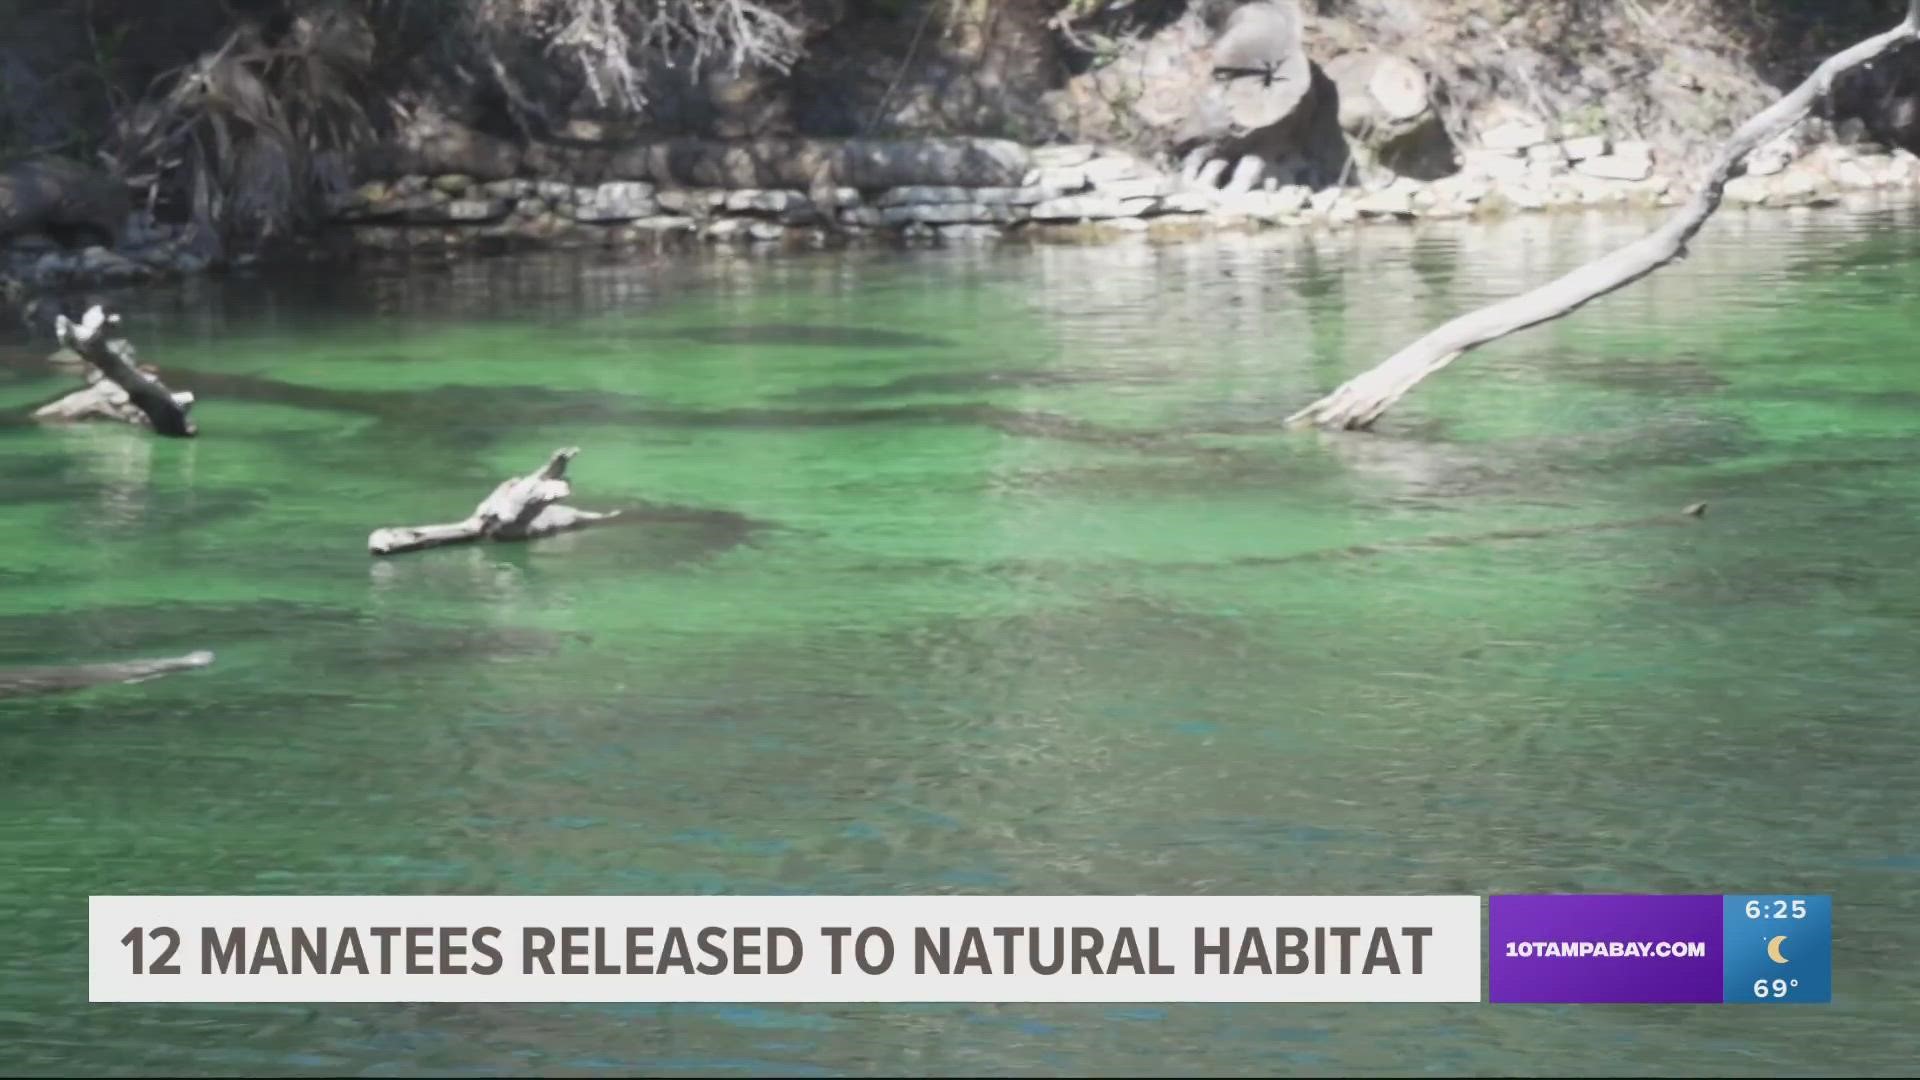 Many of the manatees were rescued as orphaned calves during the ongoing unusual mortality event.